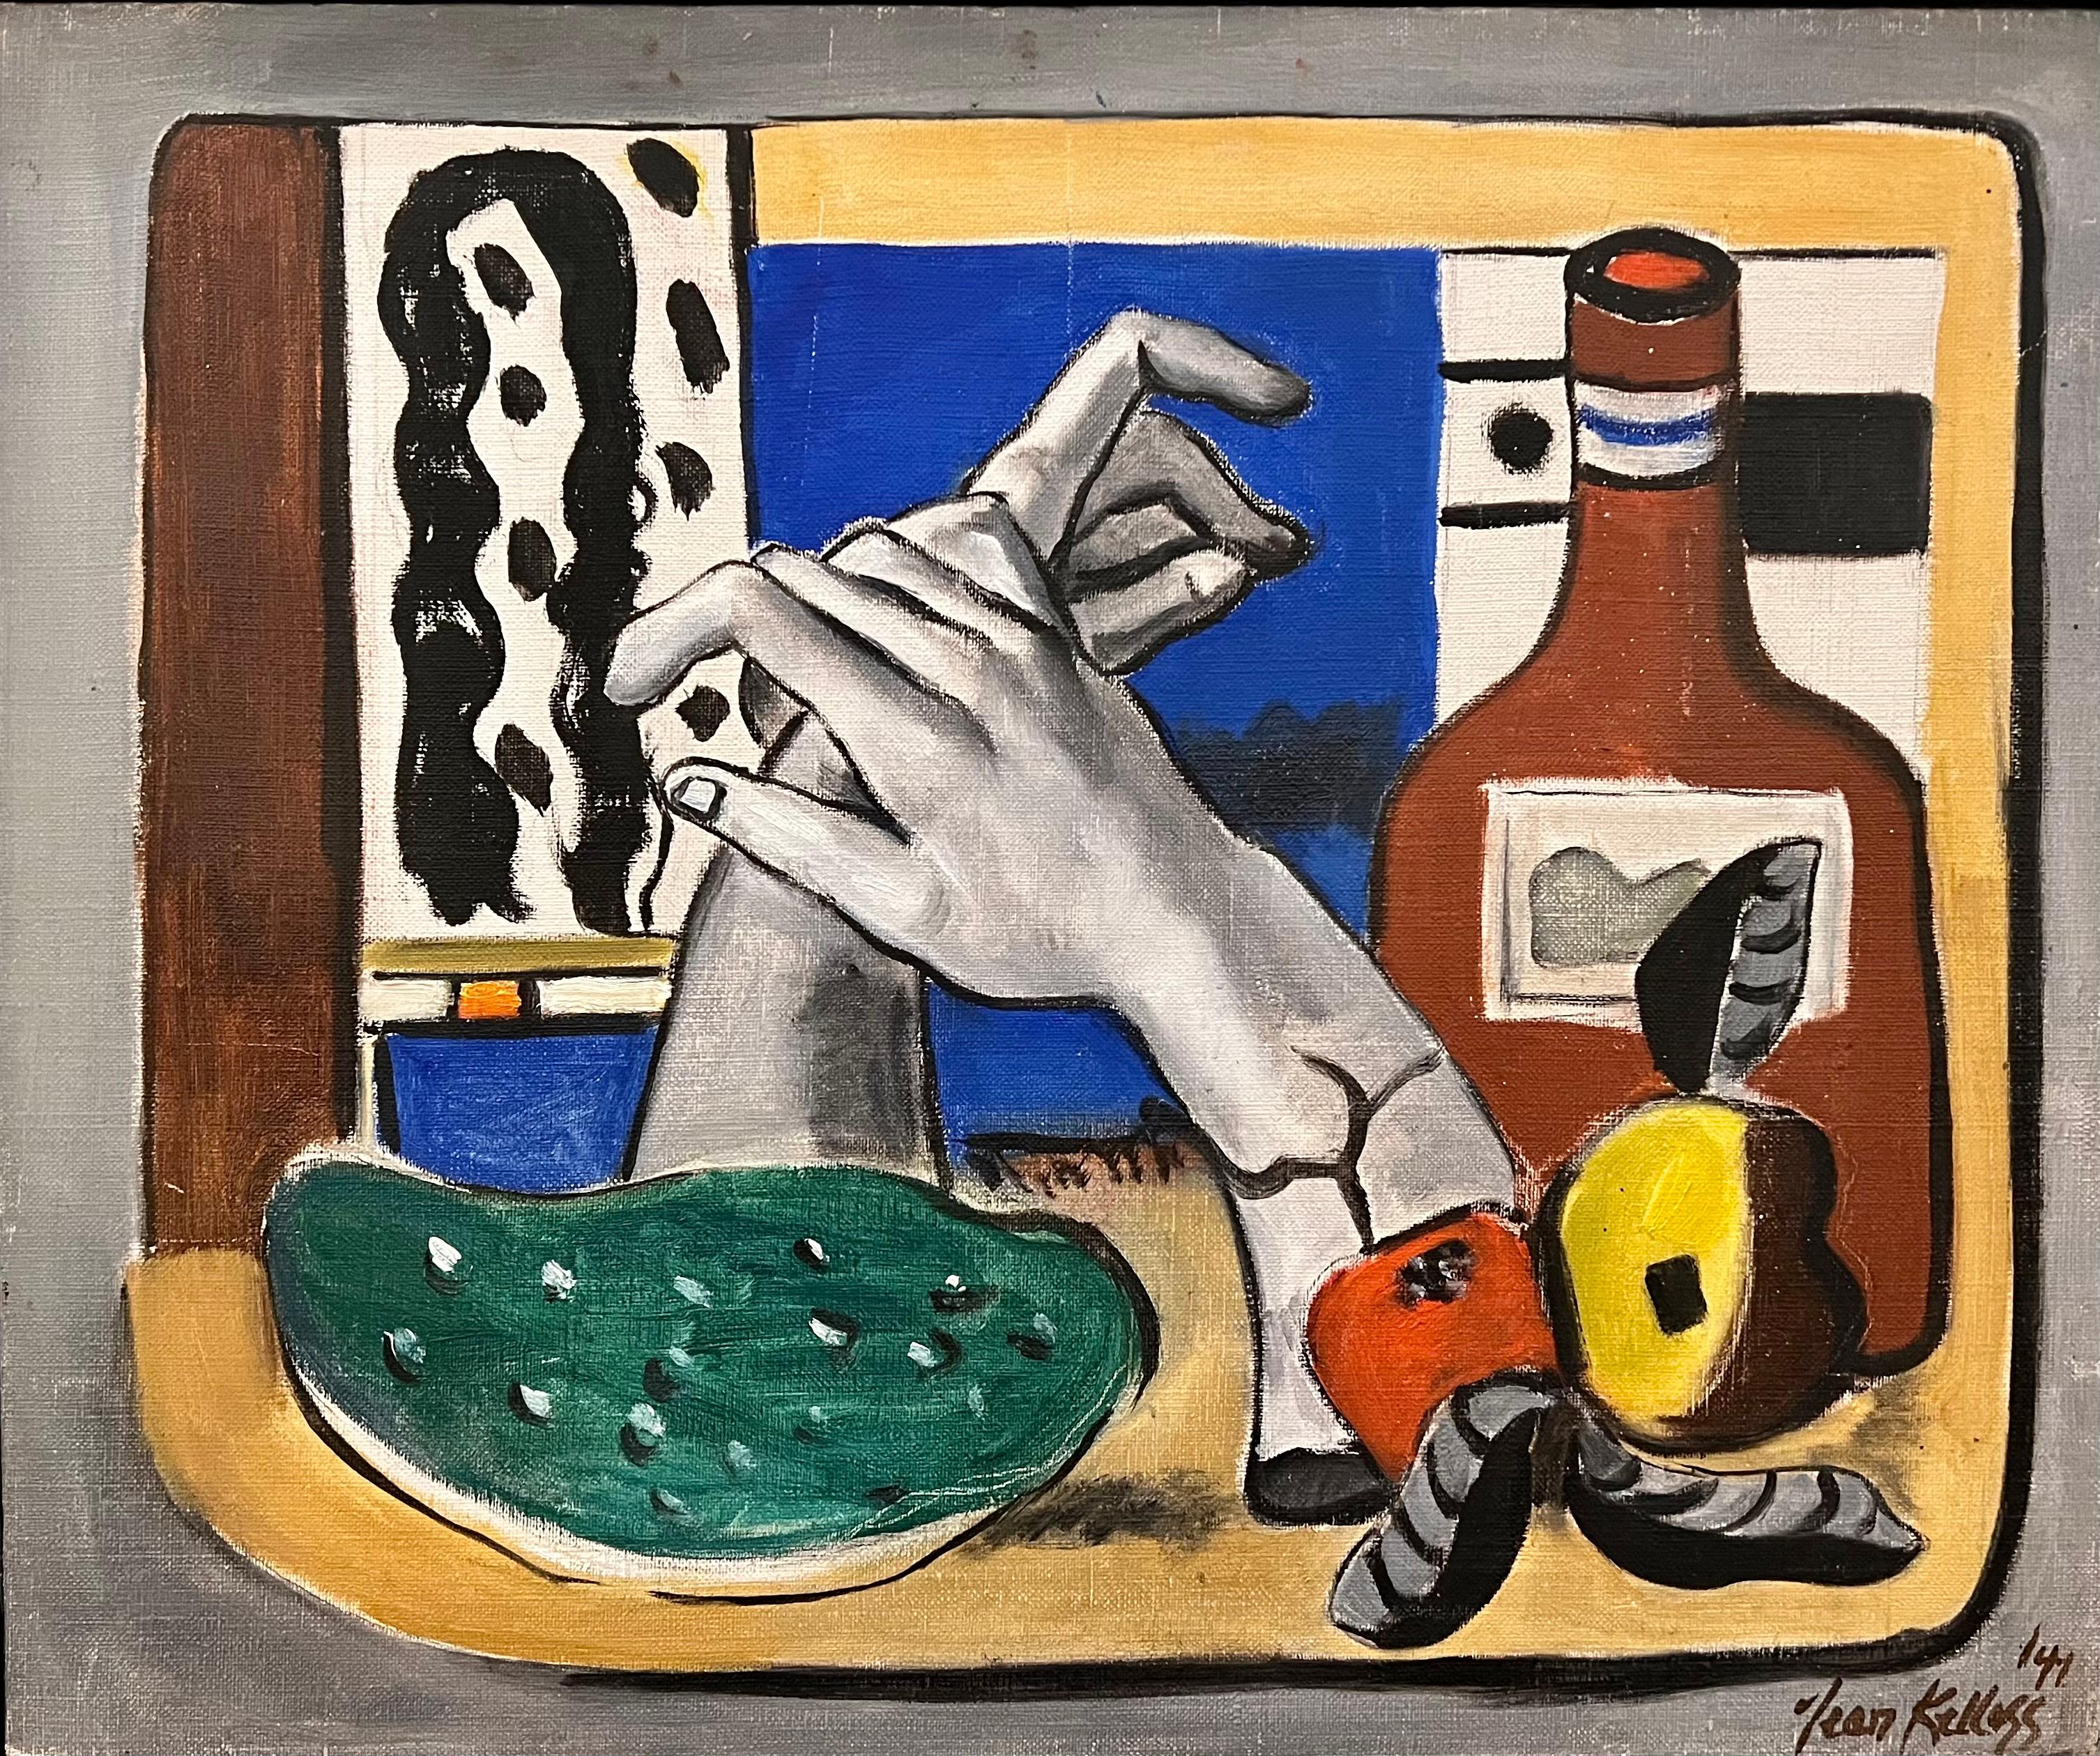 Homage to Leger - Painting by Jean Kellogg